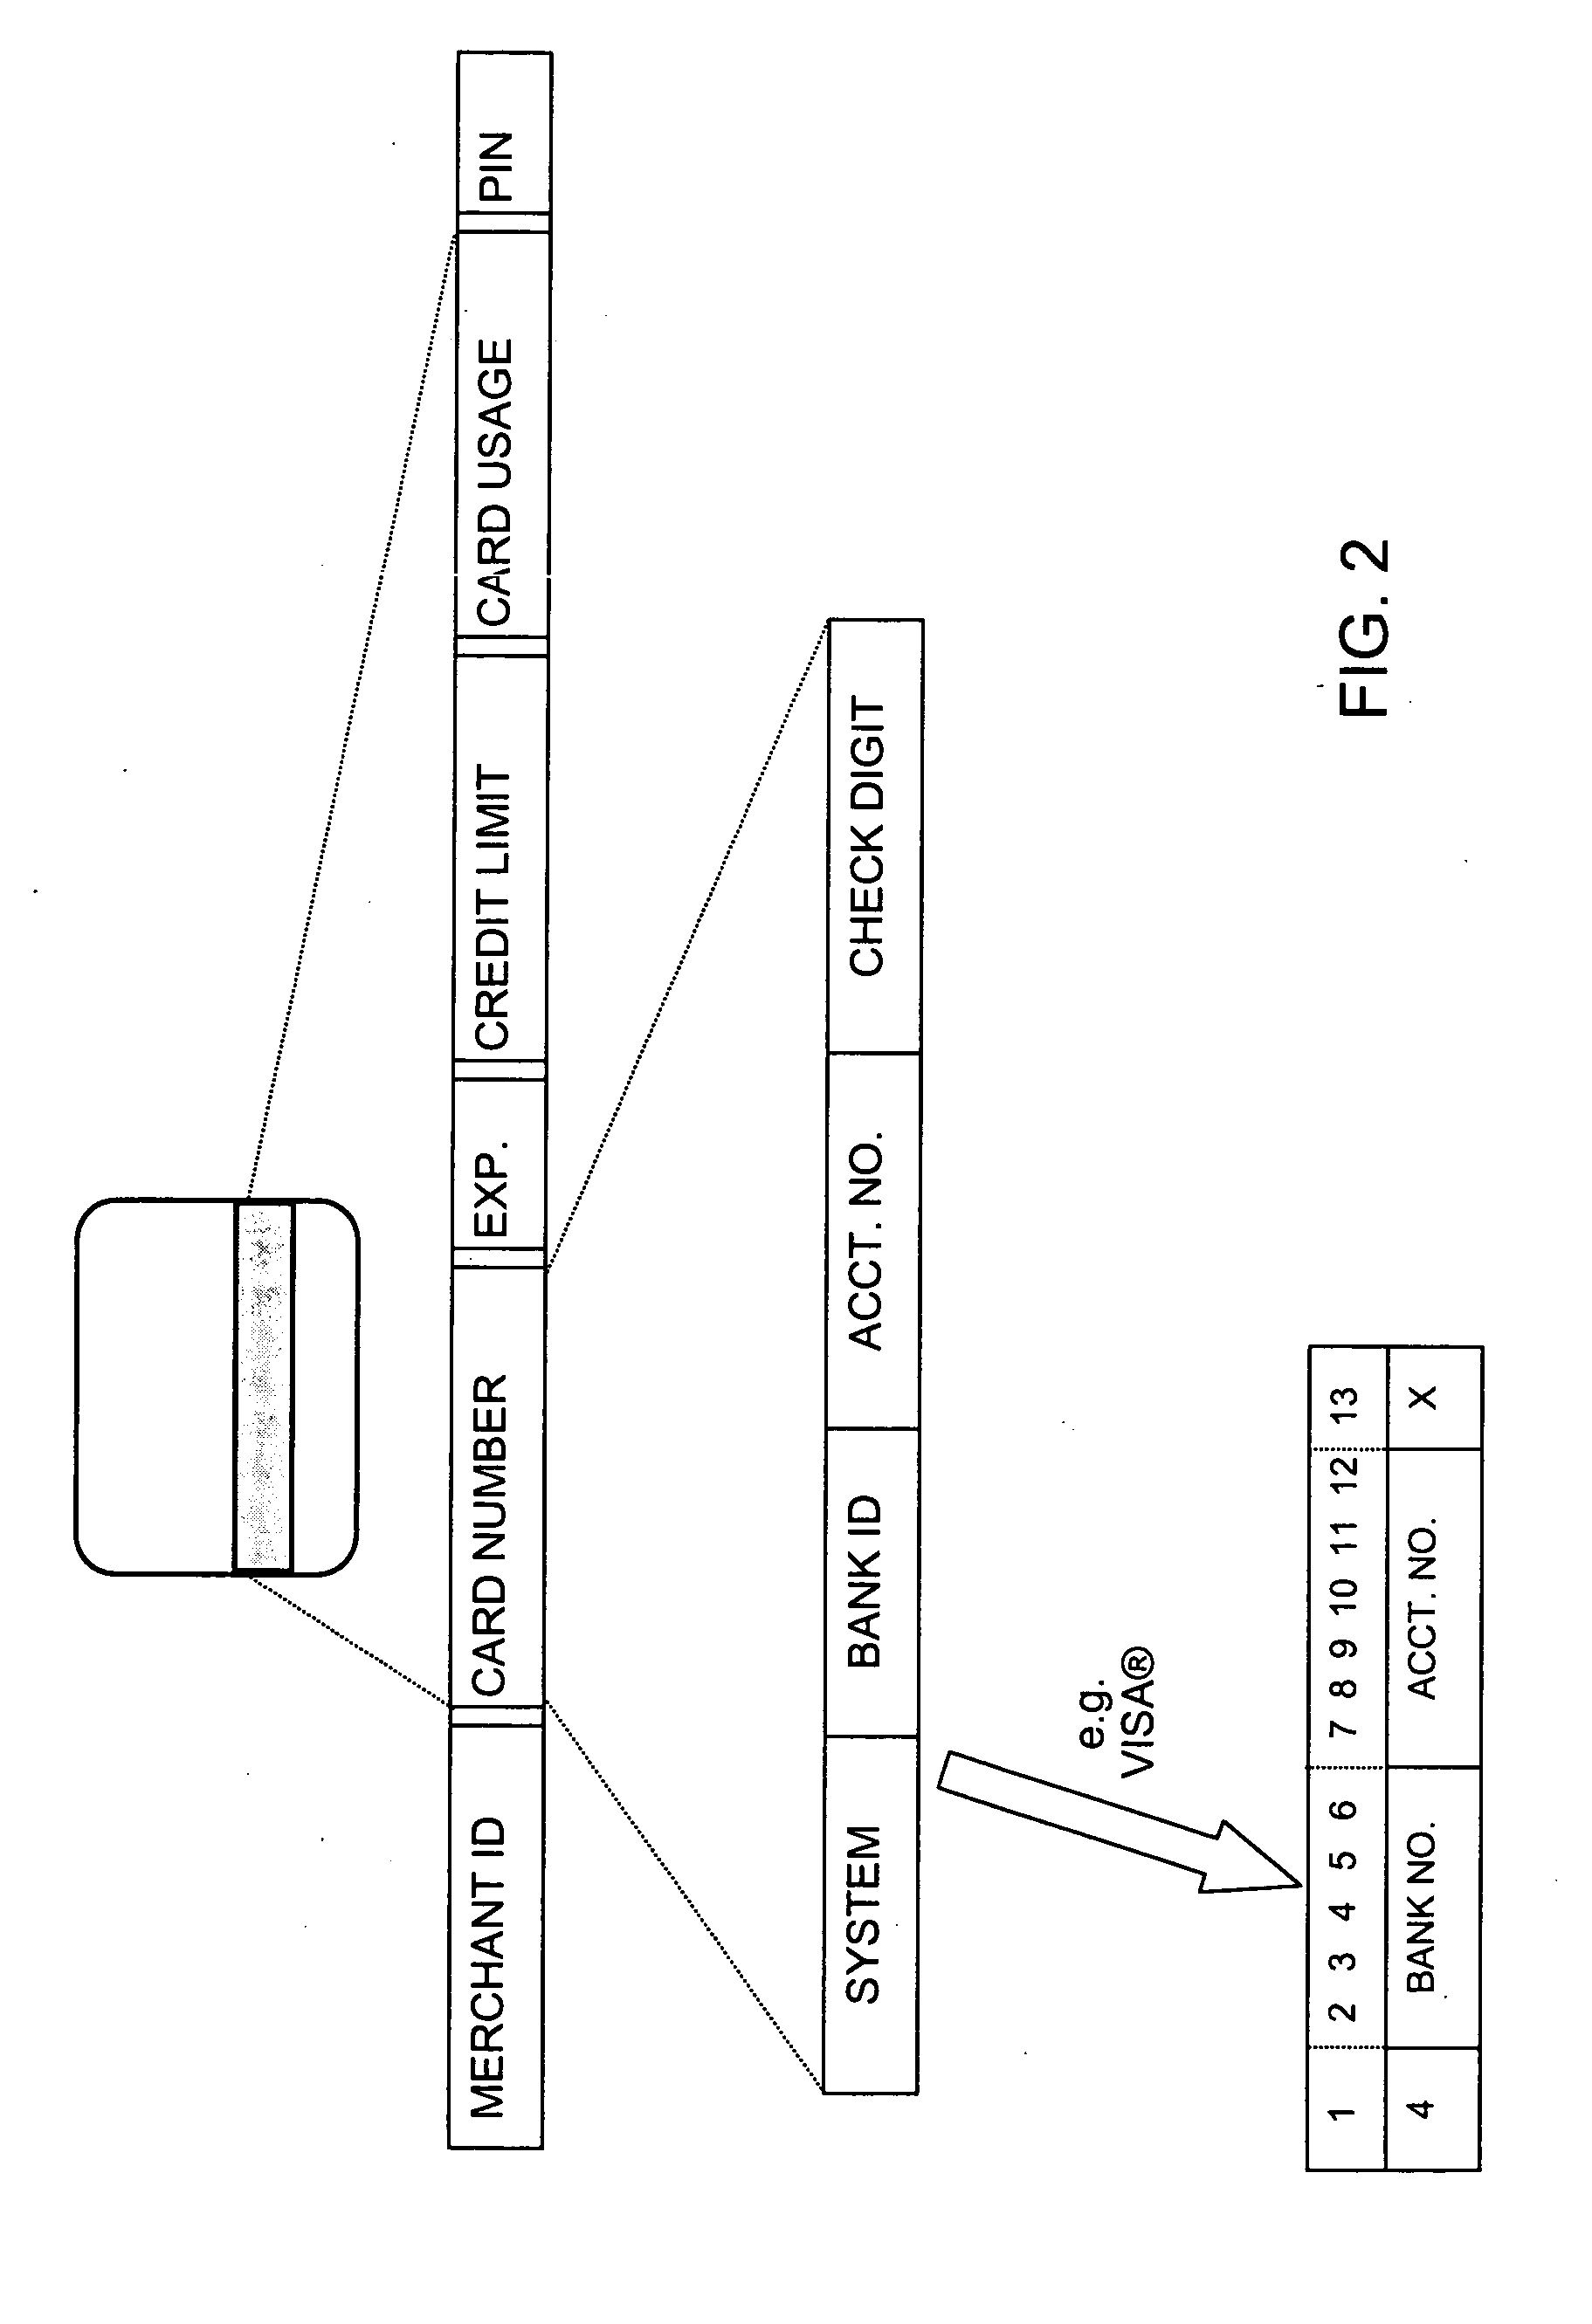 Combined credit/debit card and associated payment authorization/processing method